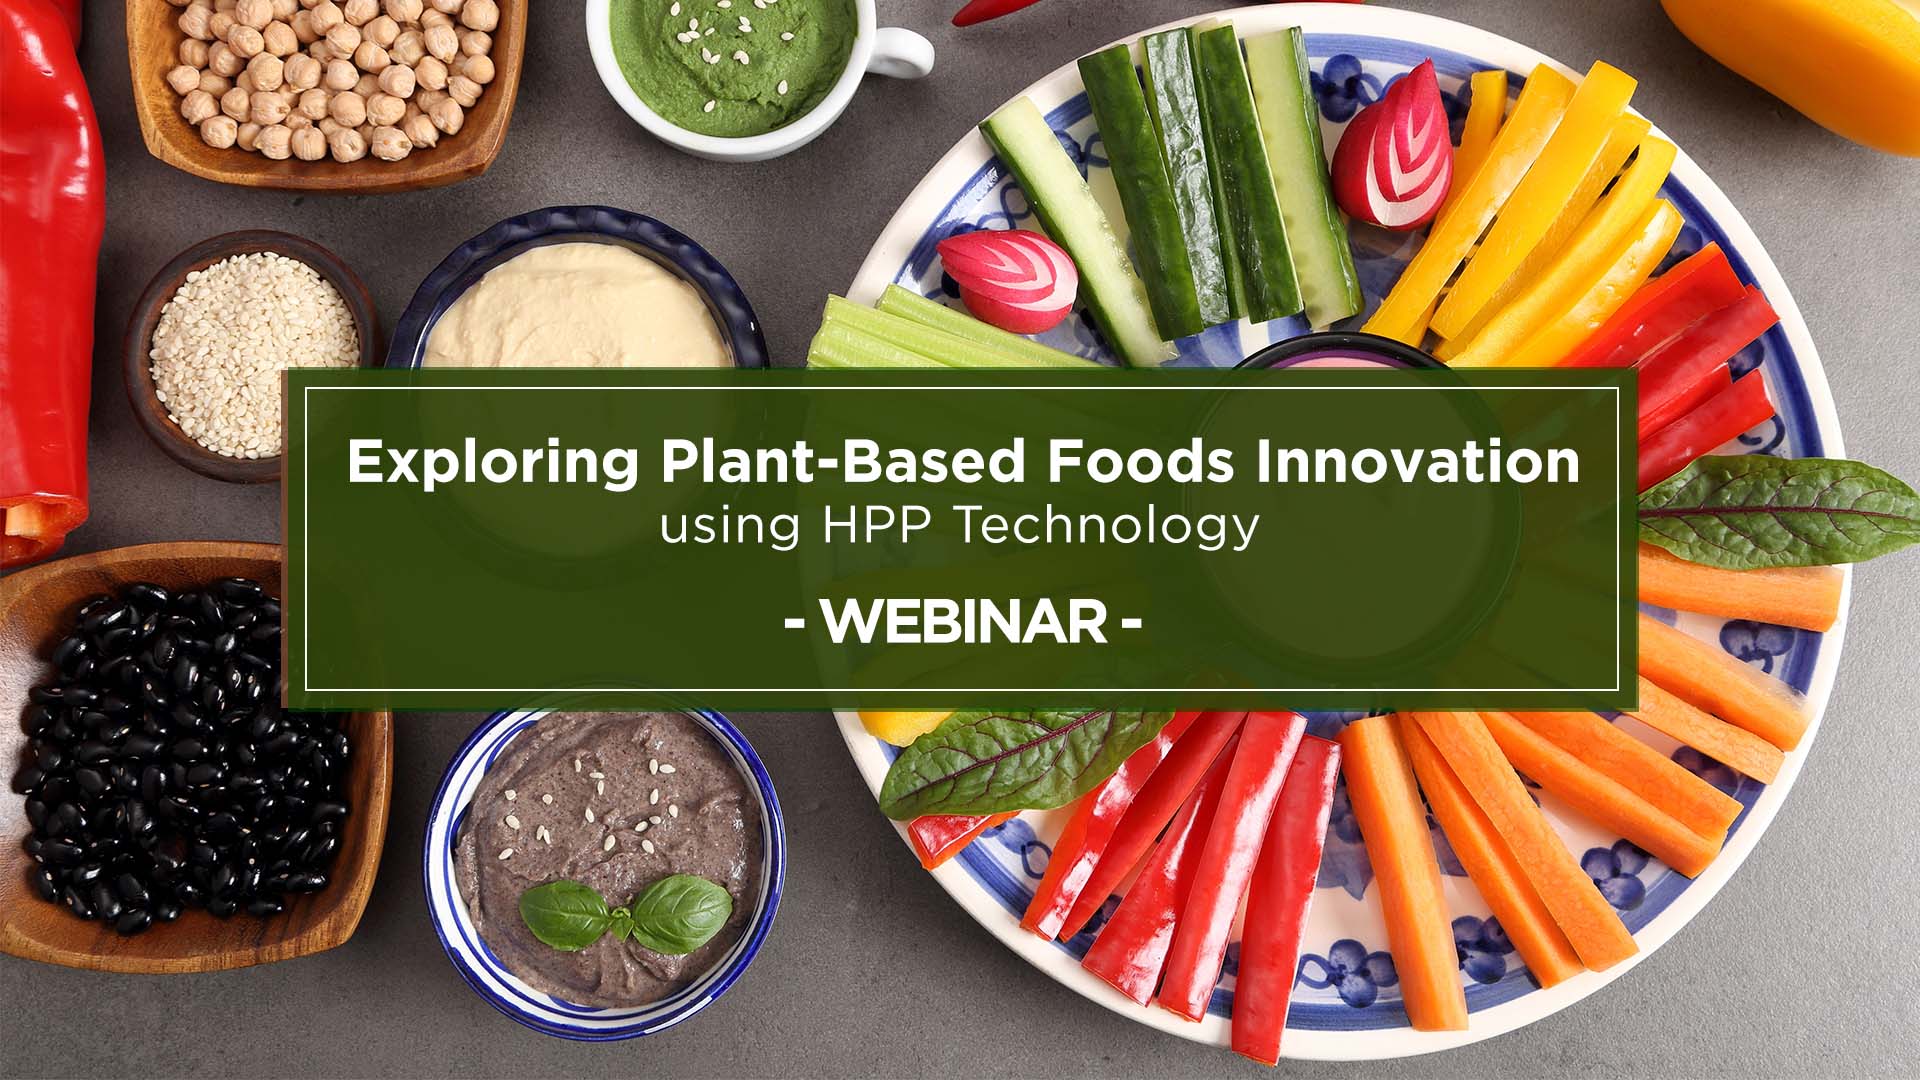 5. WEBINAR PLANT BASED PRODUCTS 1920x1080